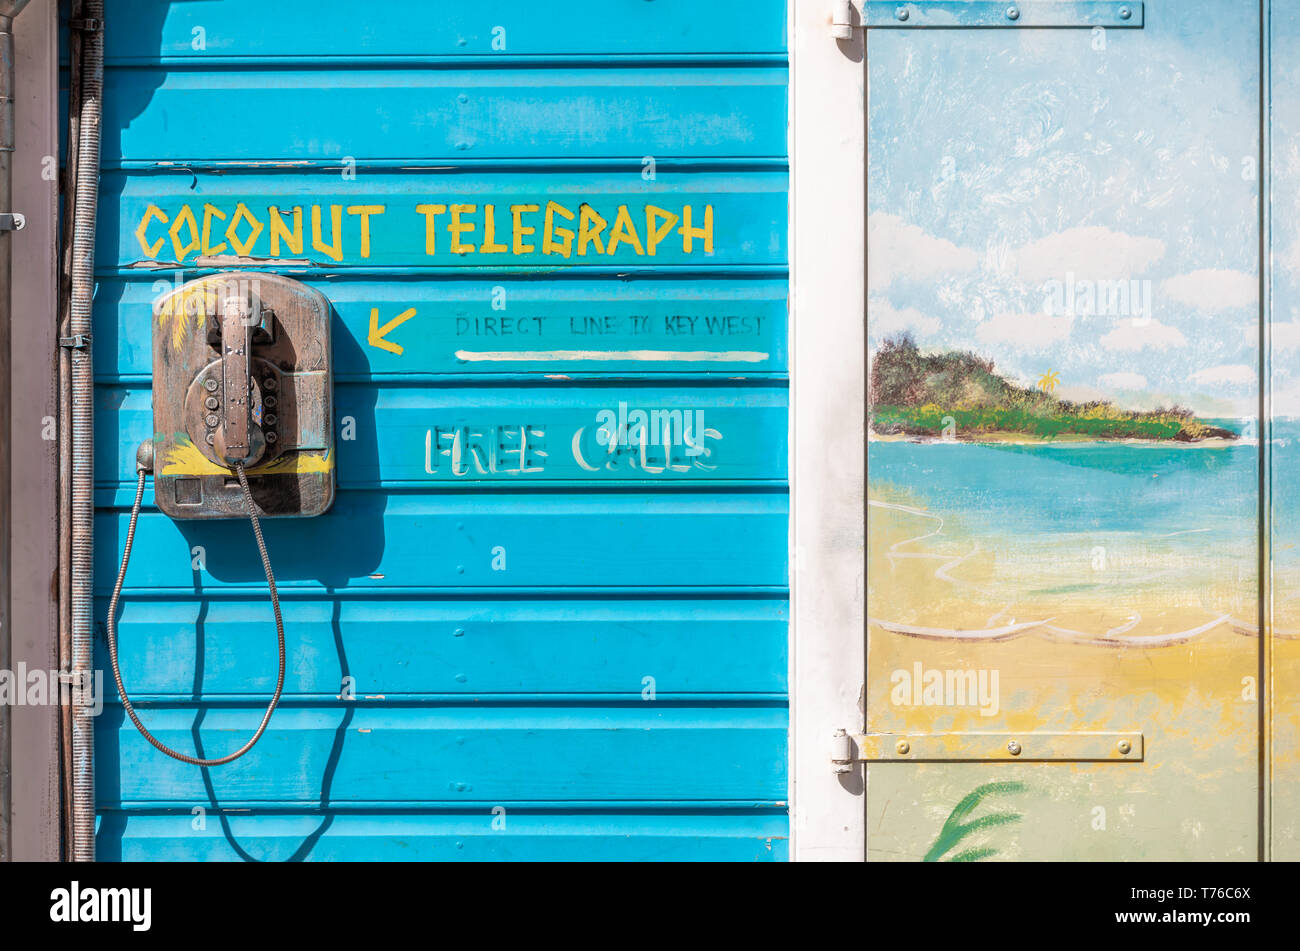 Coconut telegraph, an old phone mounted on an exterior wall in St Barts, explaining that it is a way to communicate directly with Key West Stock Photo